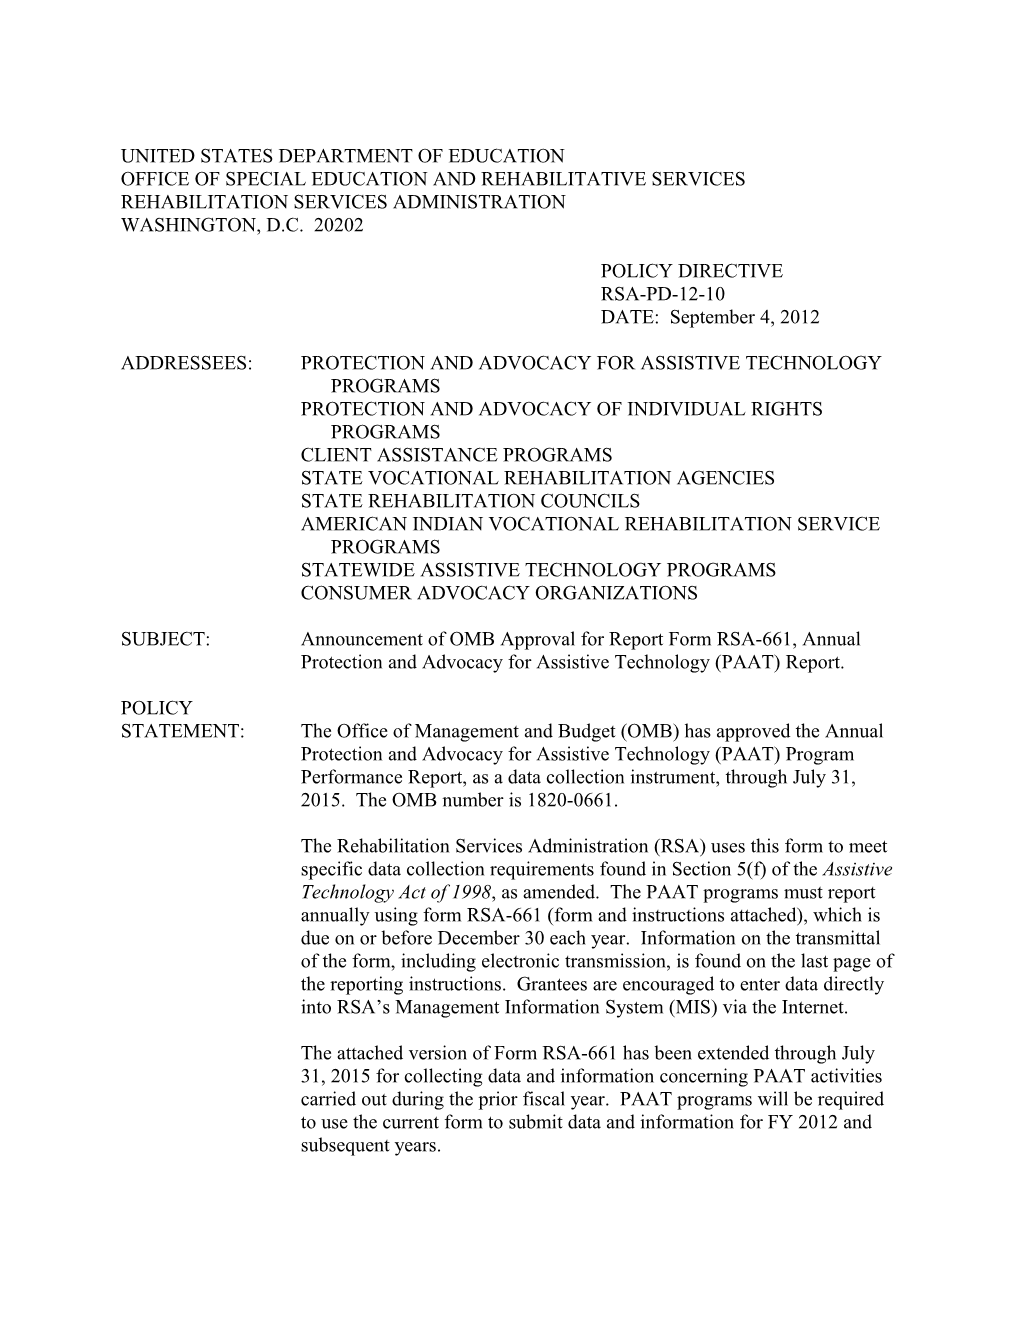 RSA-PD-12-10 - Announcement of OMB Approval for Report Form RSA-661, Annual Protection